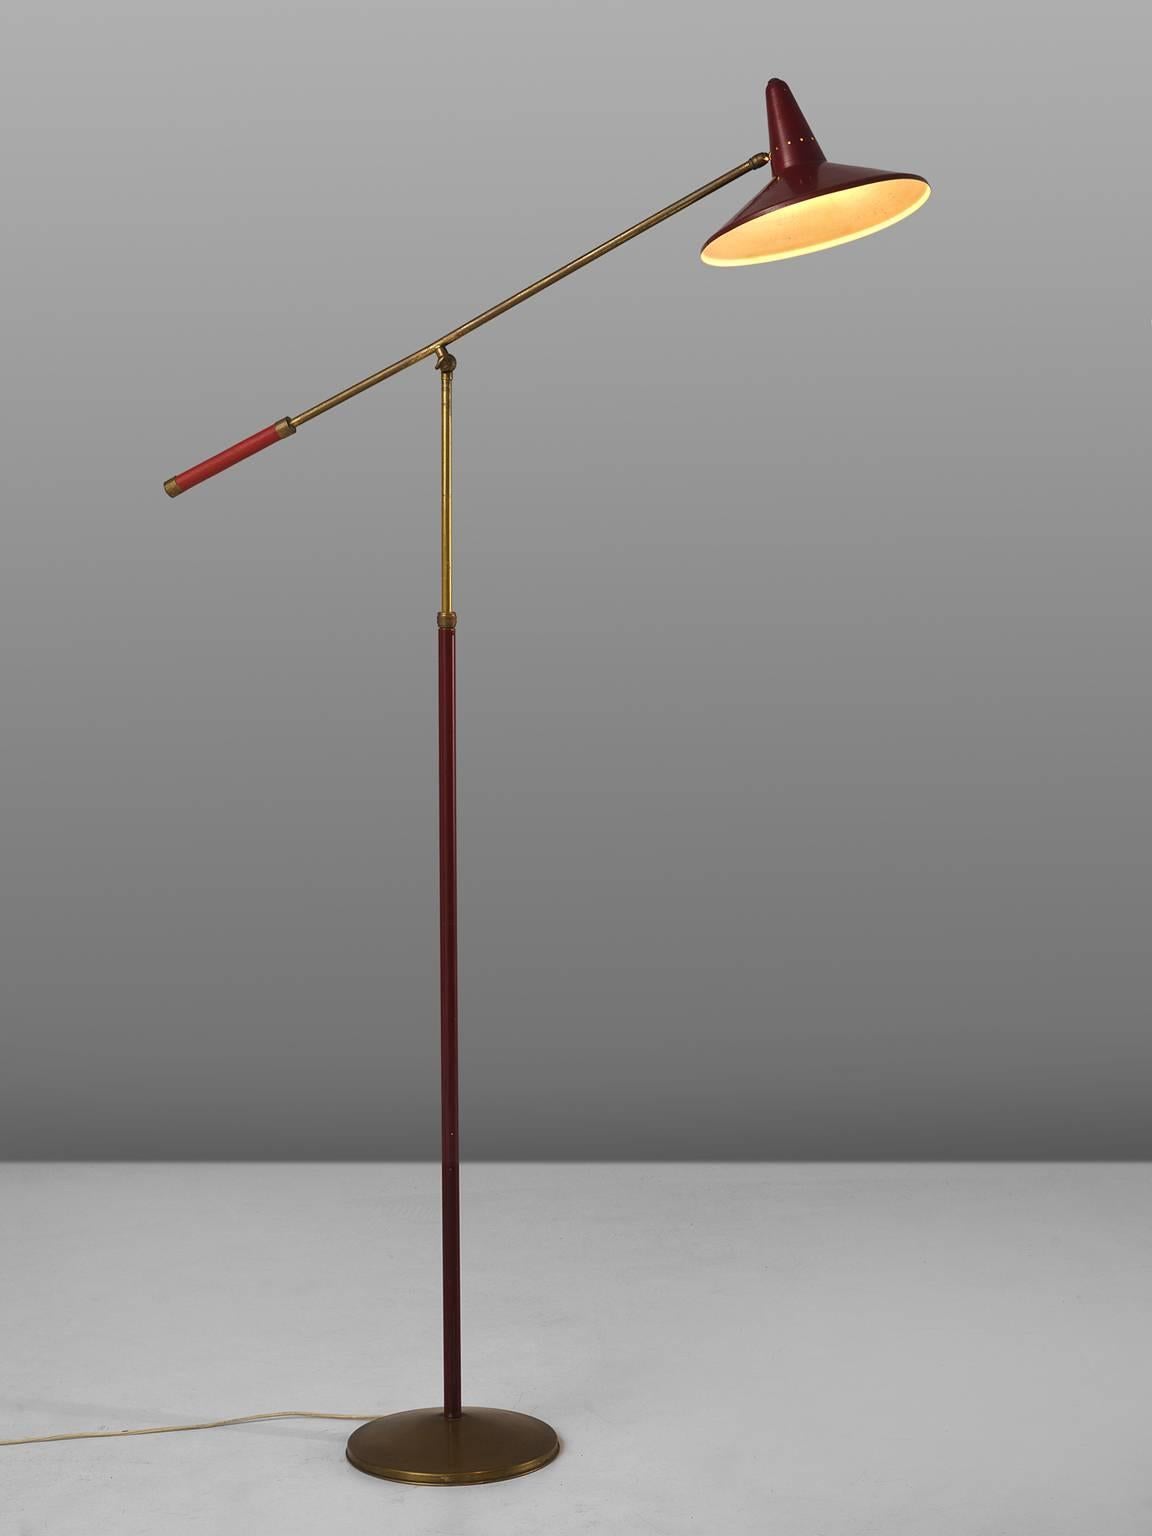 Floor lamp, brass, metal, Italy, 1950s.

This floor lamp with red metal shade and round brass base features elegant and warm details such as the patinated brass that combines perfectly with the deep red coated metal. The shade features a classic